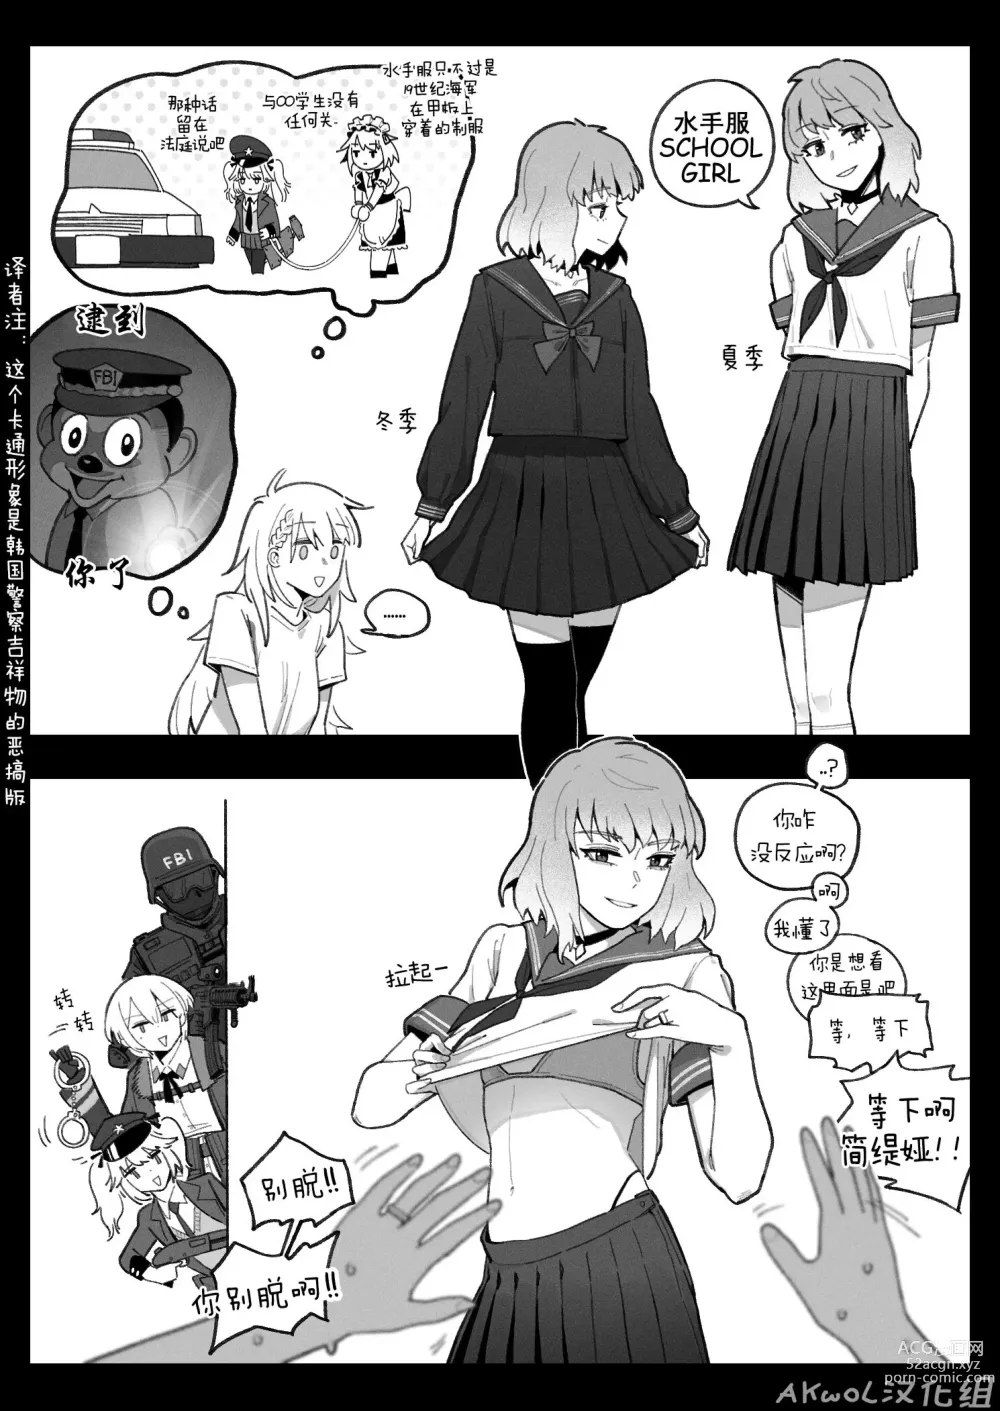 Page 7 of doujinshi Cosplay (decensored)